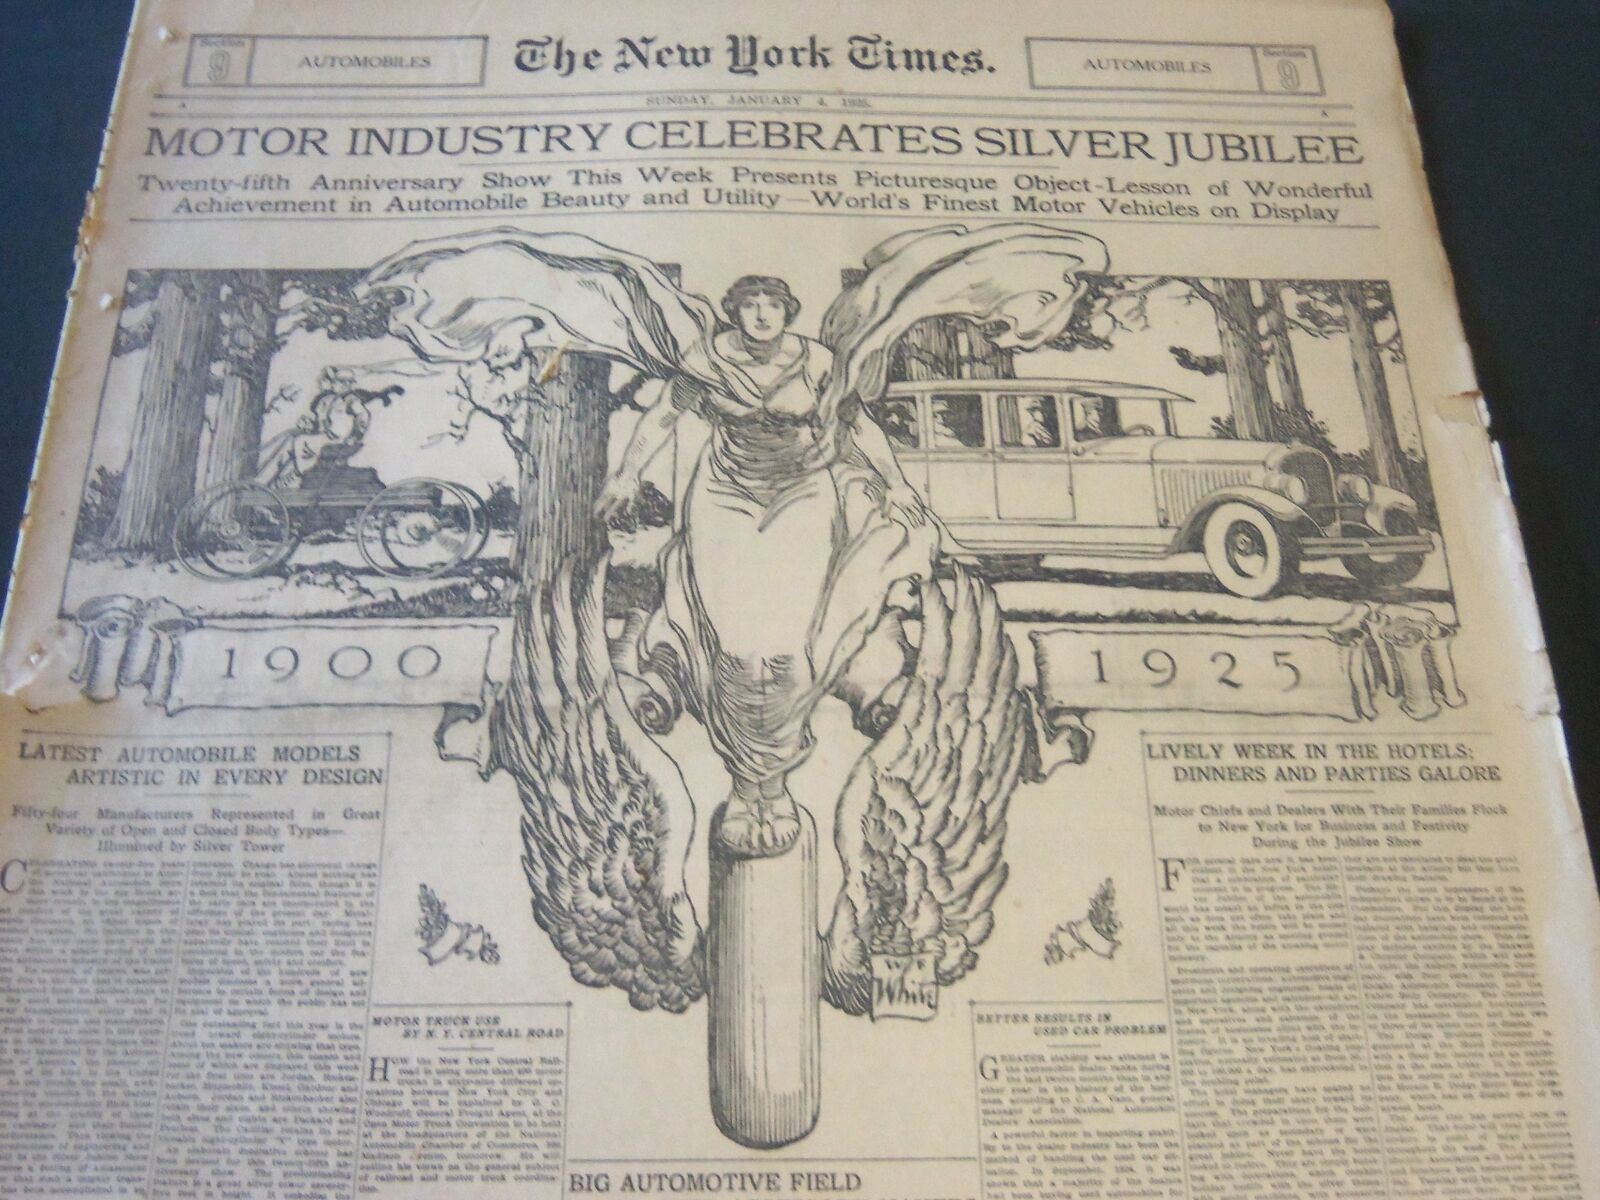 1925 JANUARY 4 NEW YORK TIMES AUTOMOBILE SECTION - MOTOR INDUSTRY - NT 6301